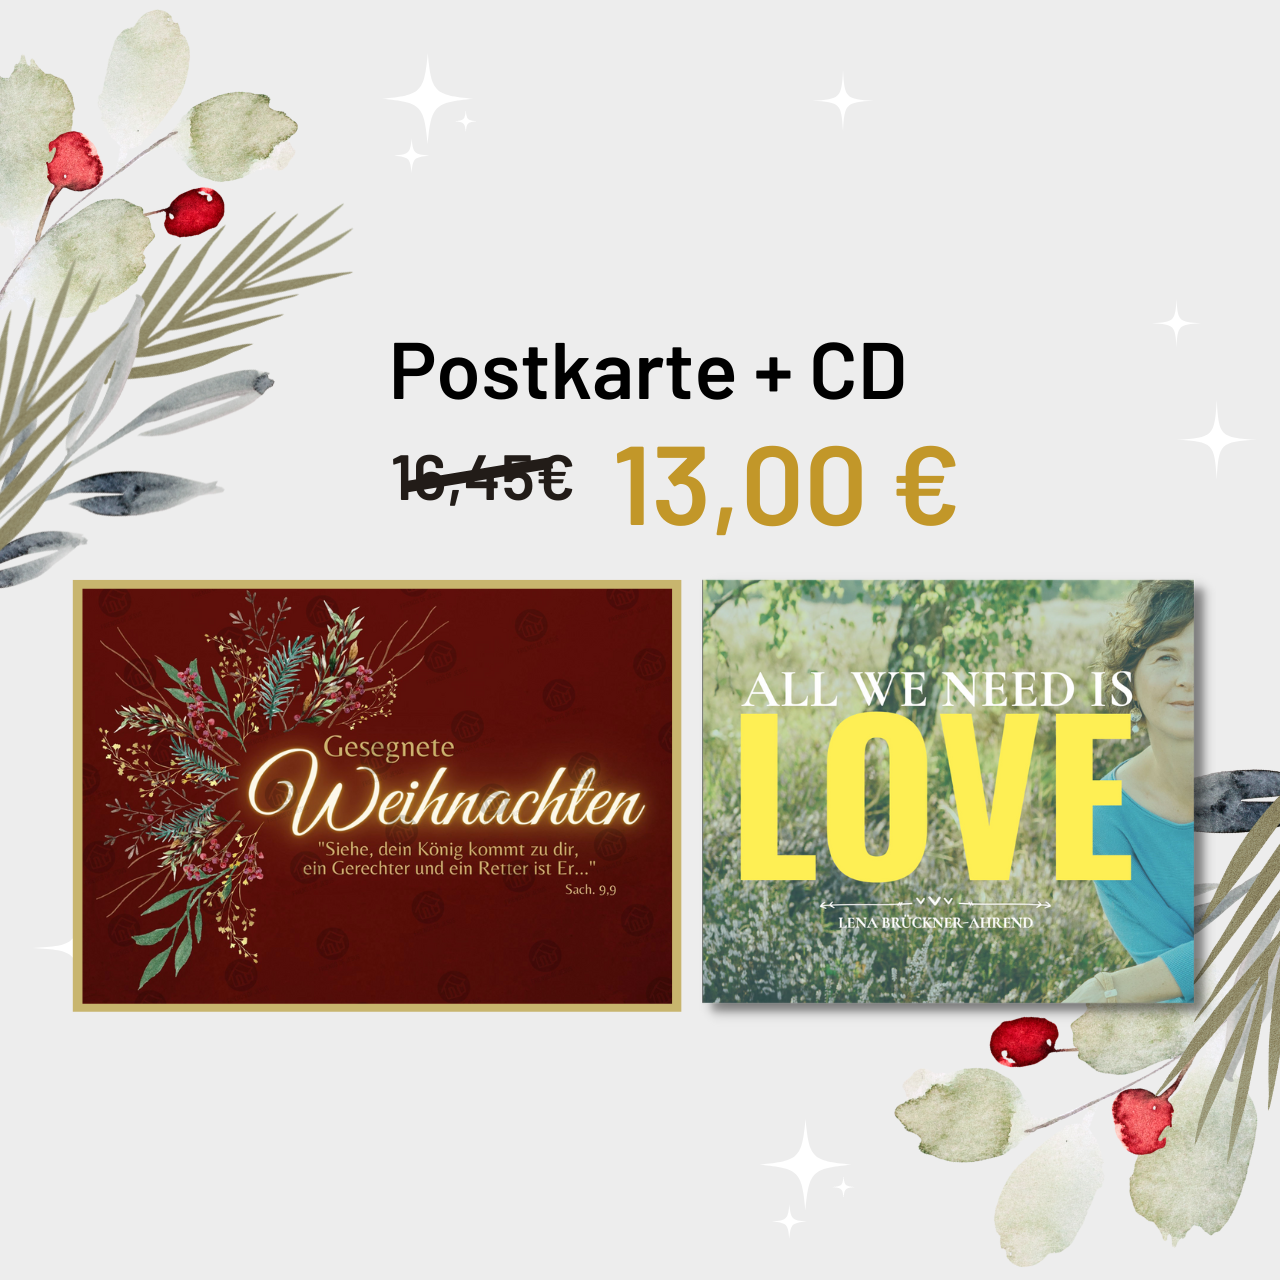 All we need is love - Special (CD + Postkarte)